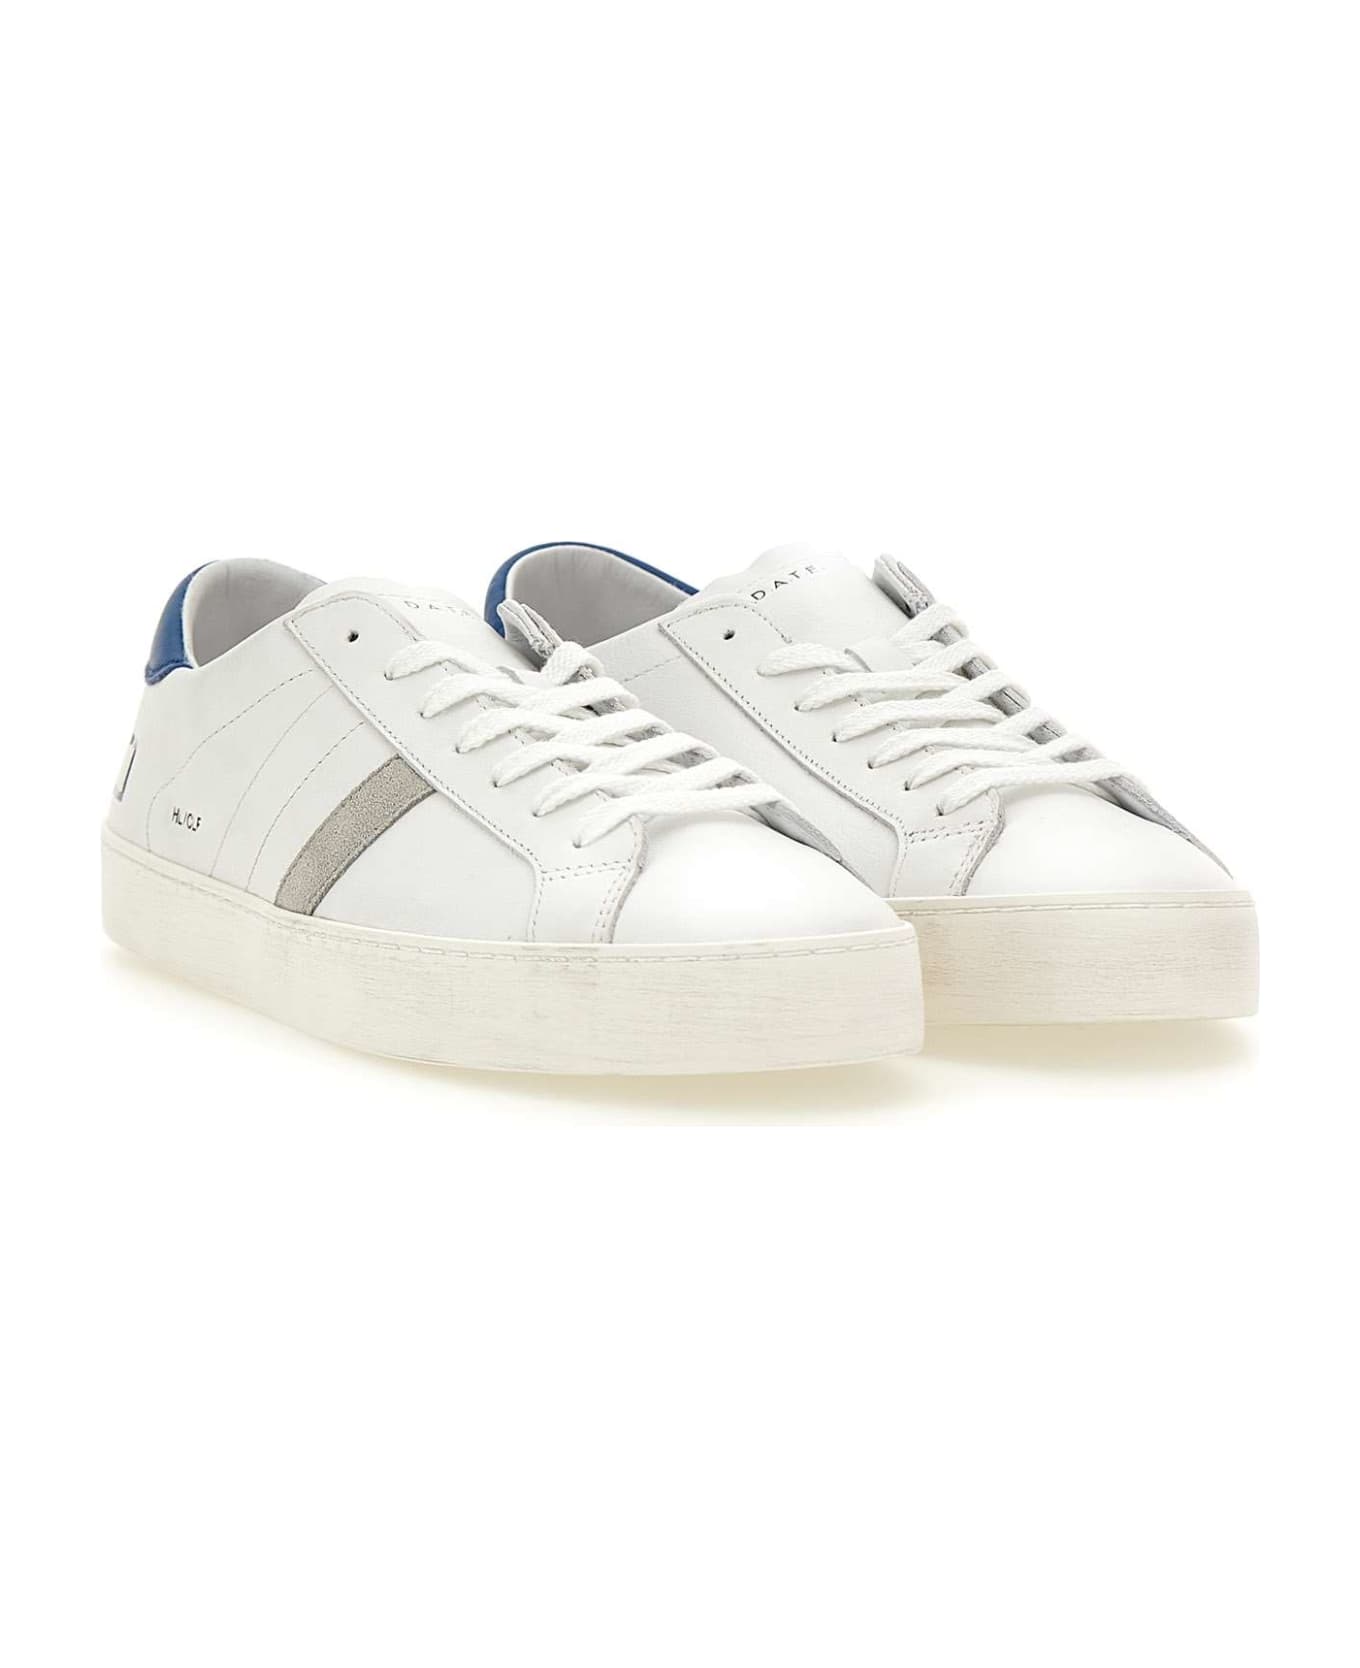 D.A.T.E. "hillow Calf" Leather Sneakers - WHITE